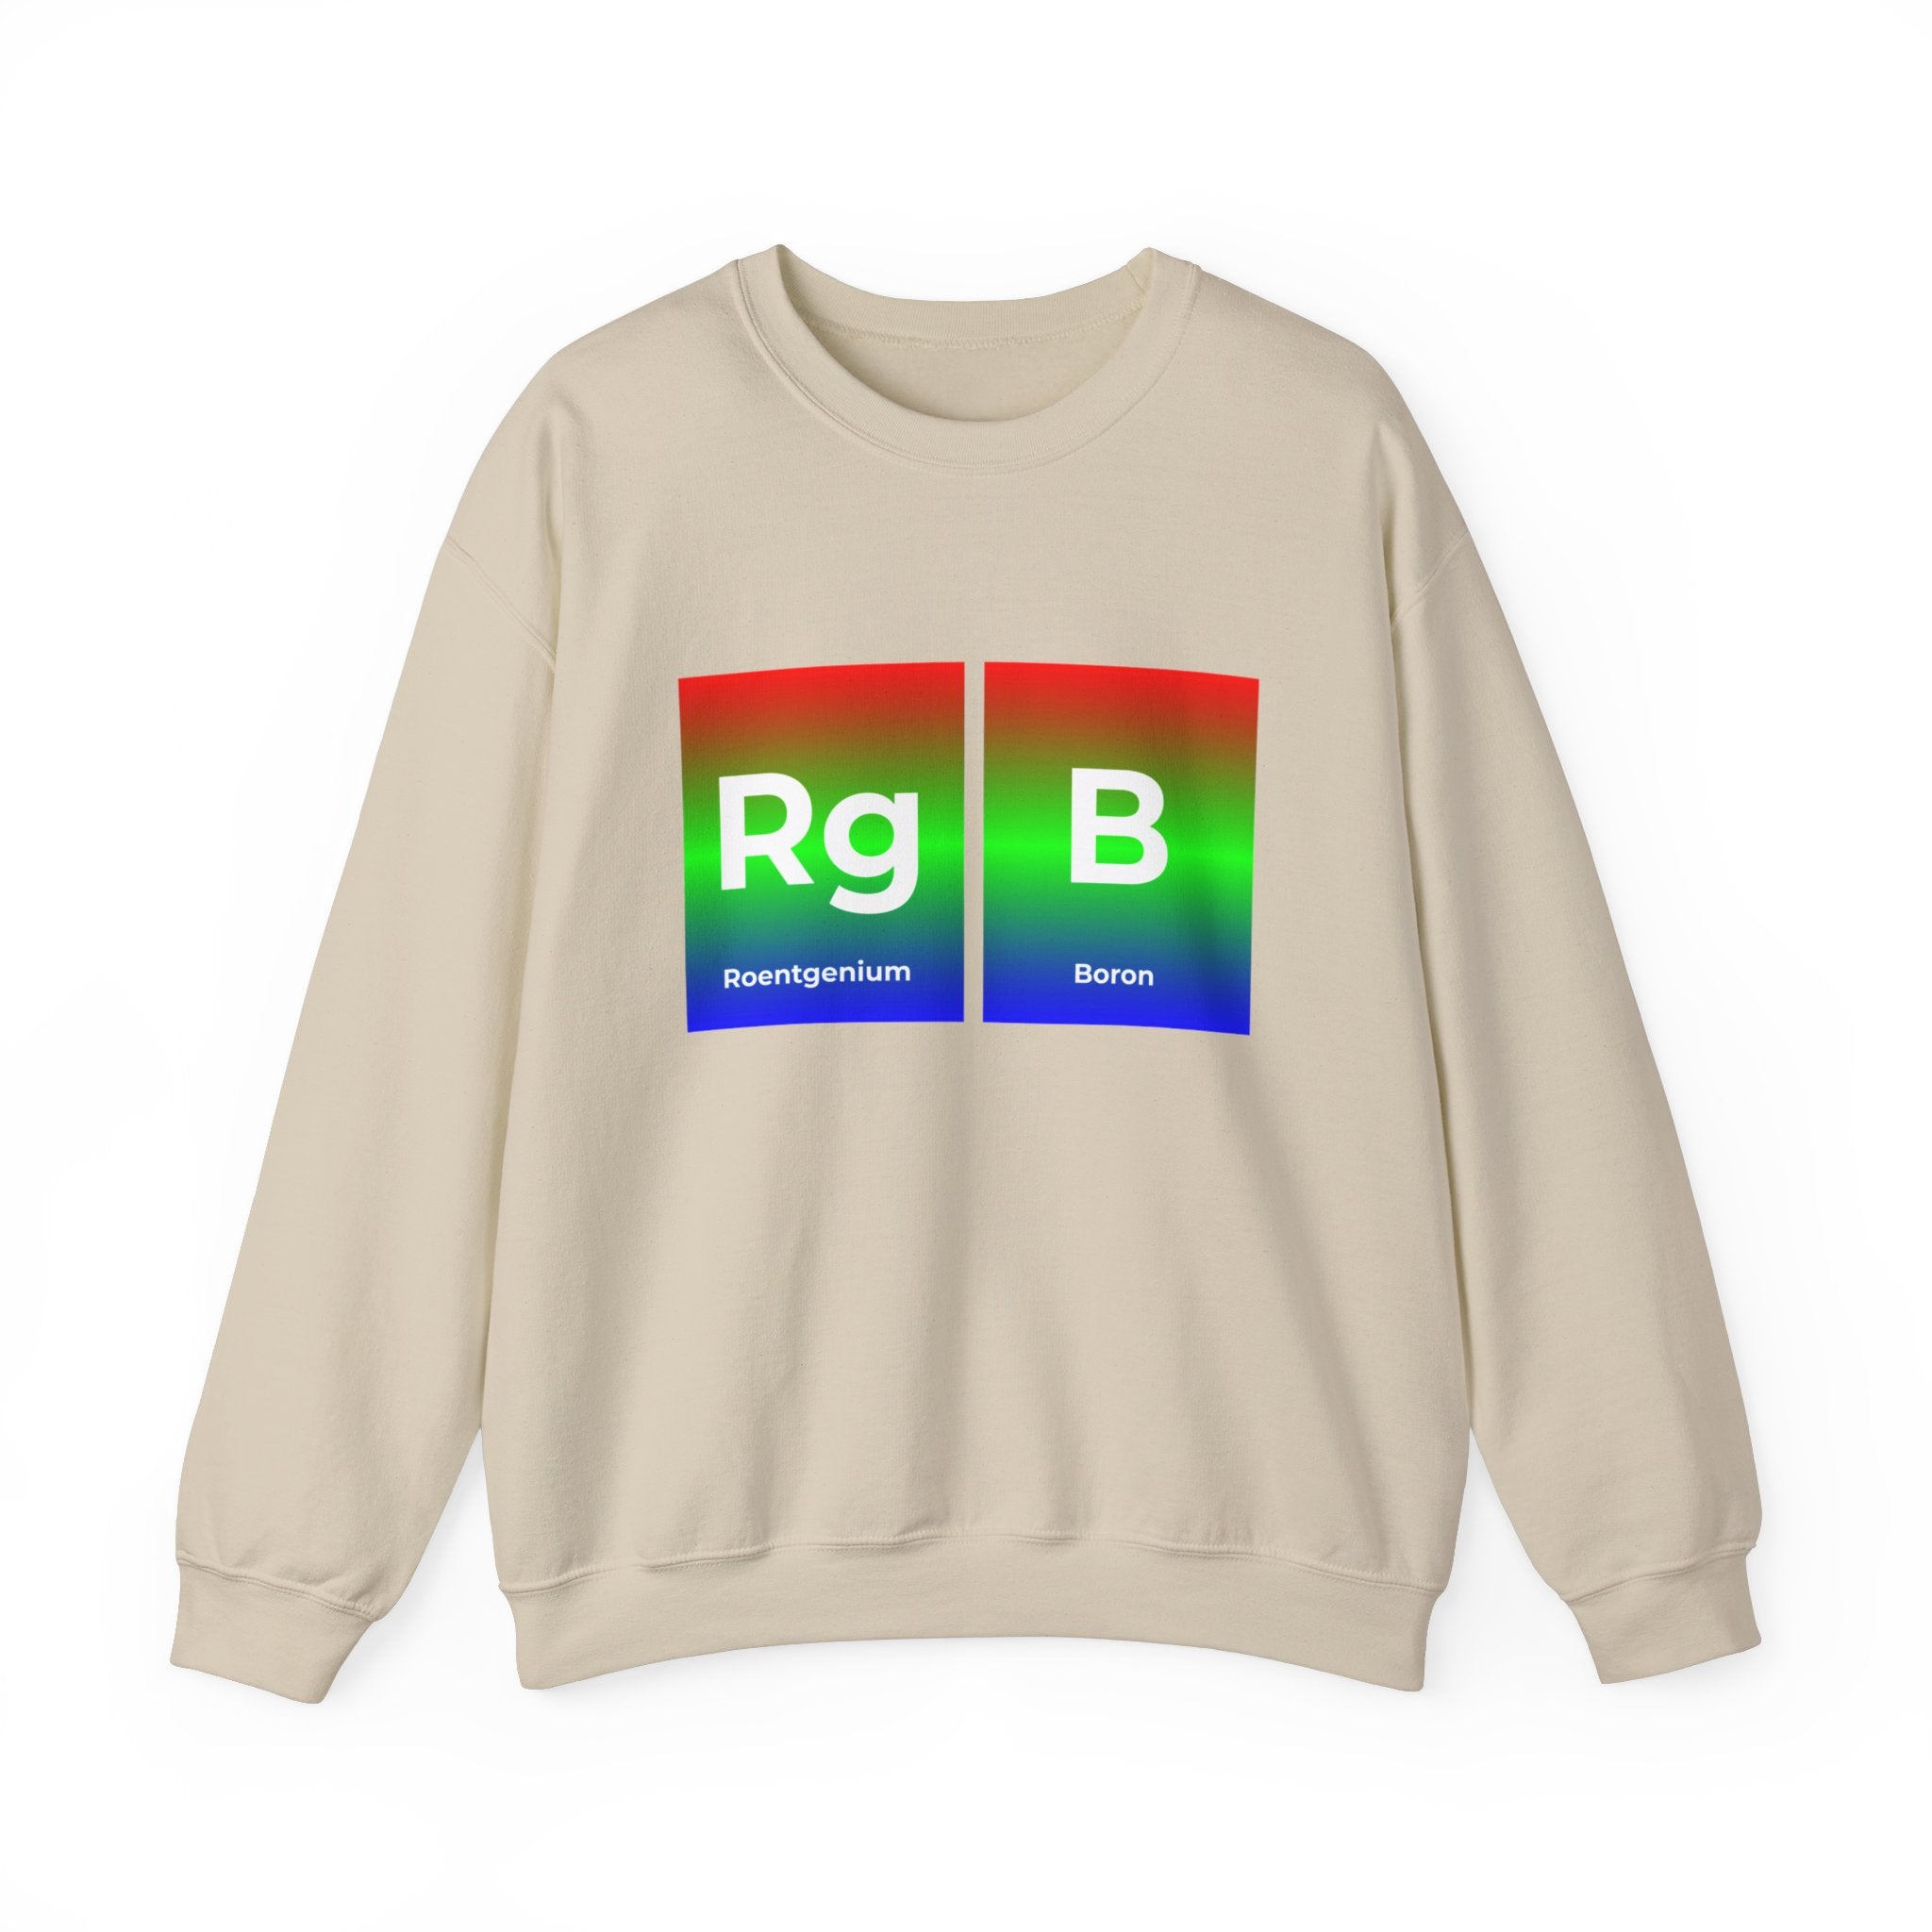 A cozy beige RG-B - Sweatshirt featuring periodic table elements Roentgenium (Rg) and Boron (B) on the front, depicted in boxes with a gradient of red to blue, ensures ultimate comfort and style.